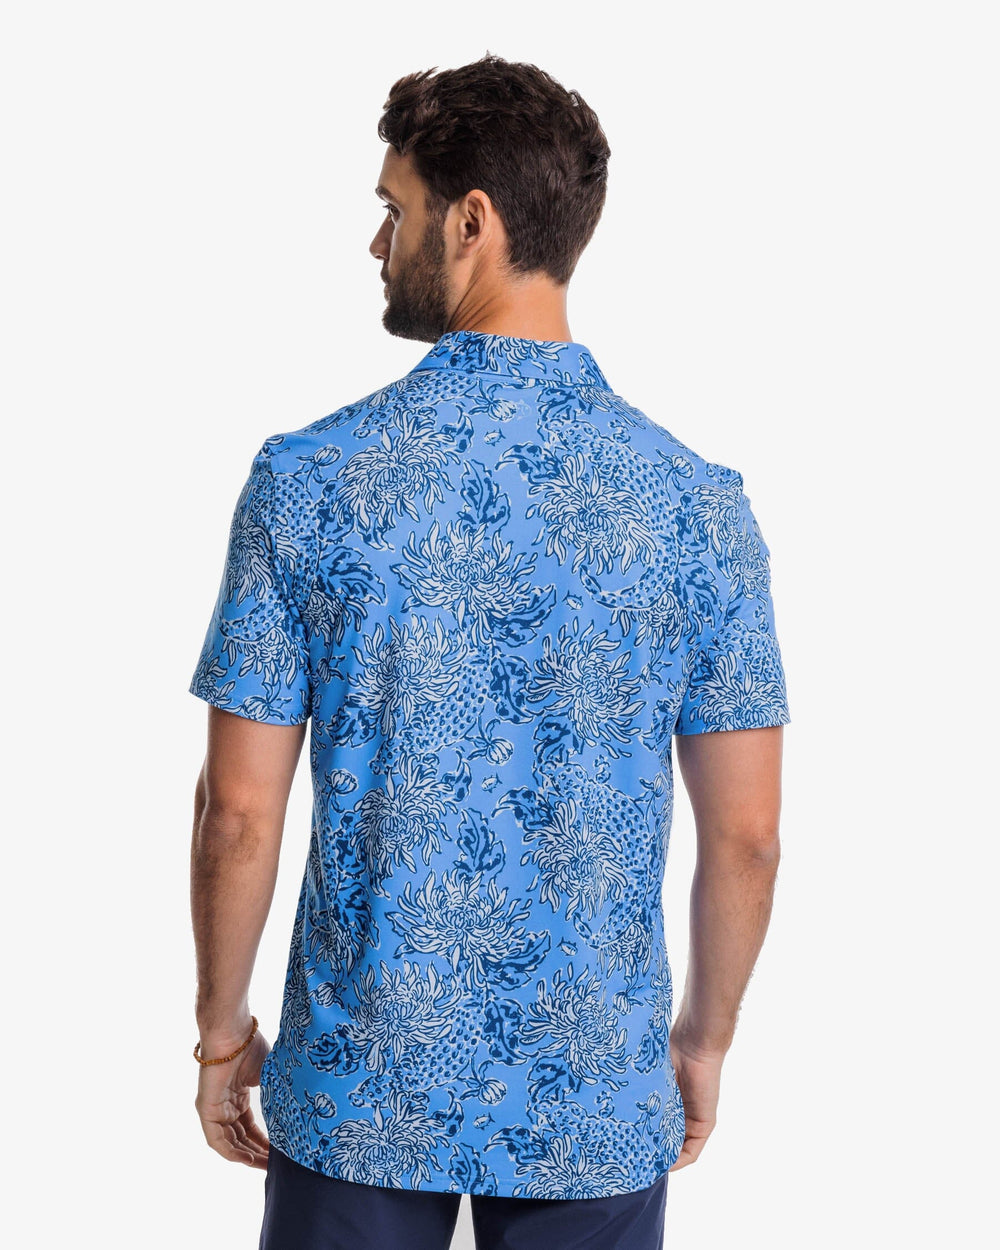 The back view of the Ryder Croc and Lock It Polo Shirt by Southern Tide - Boca Blue